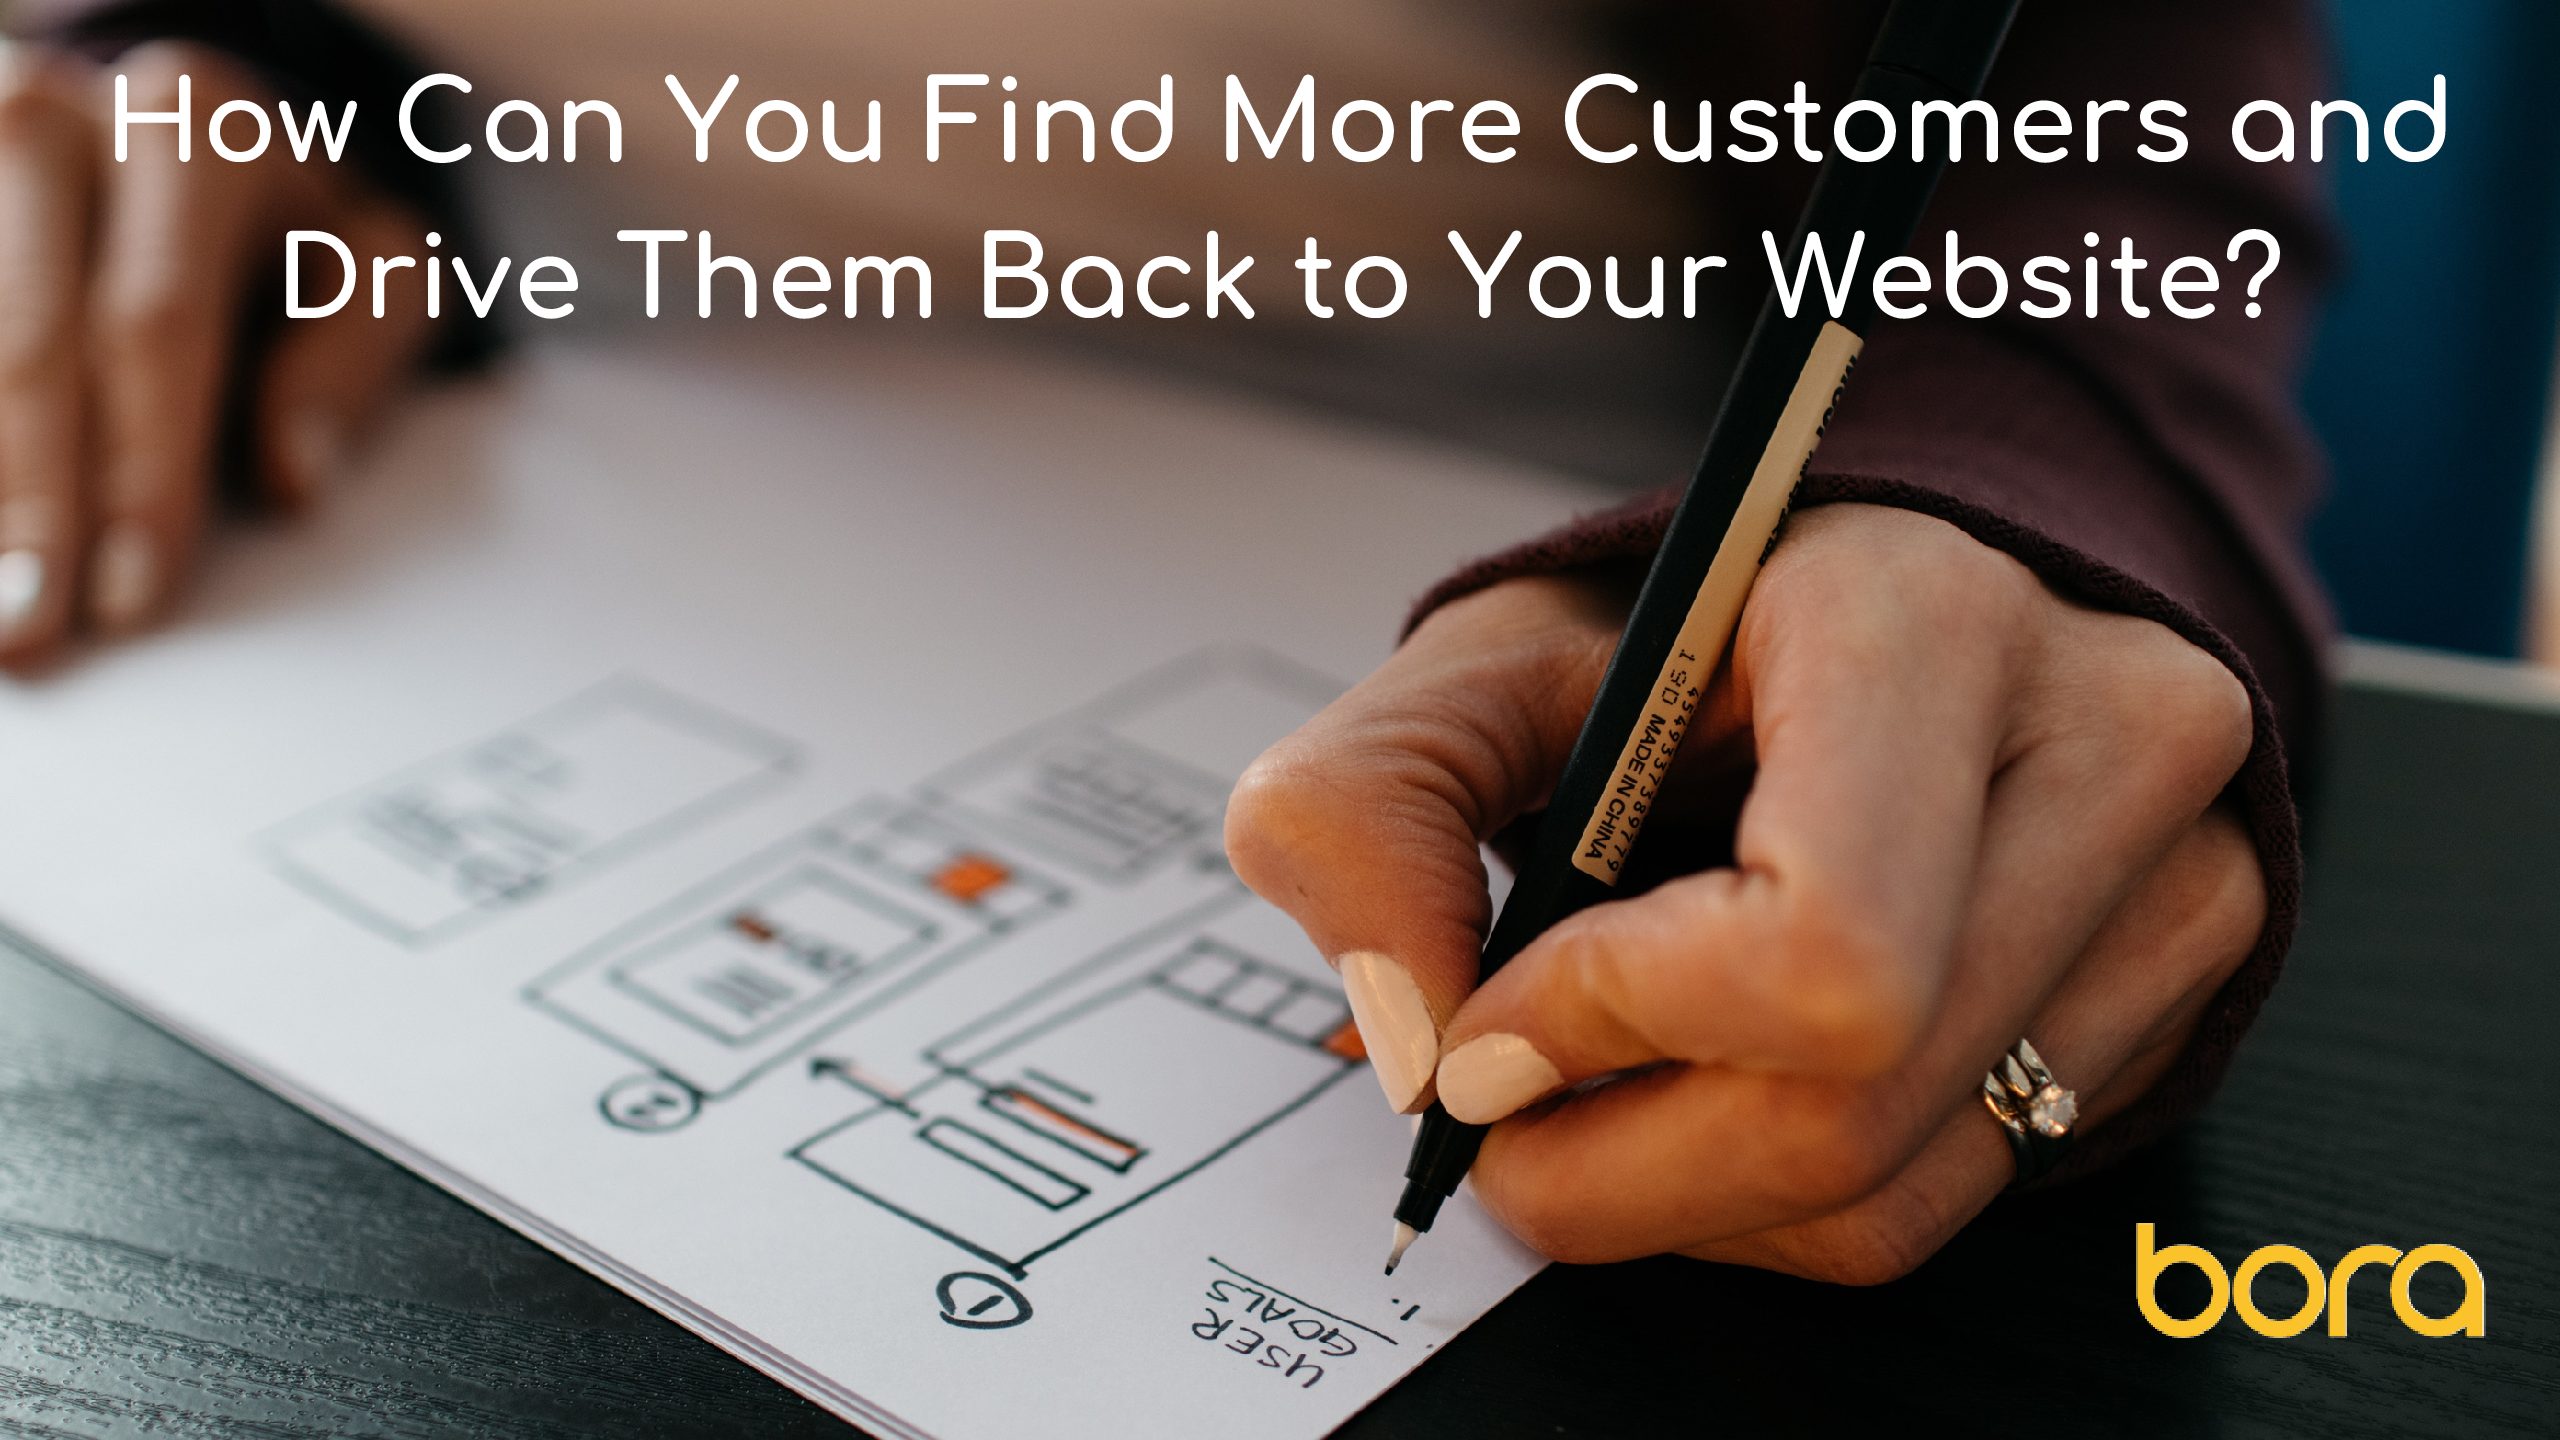 How Can You Find More Customers And Drive Them Back To Your Website?